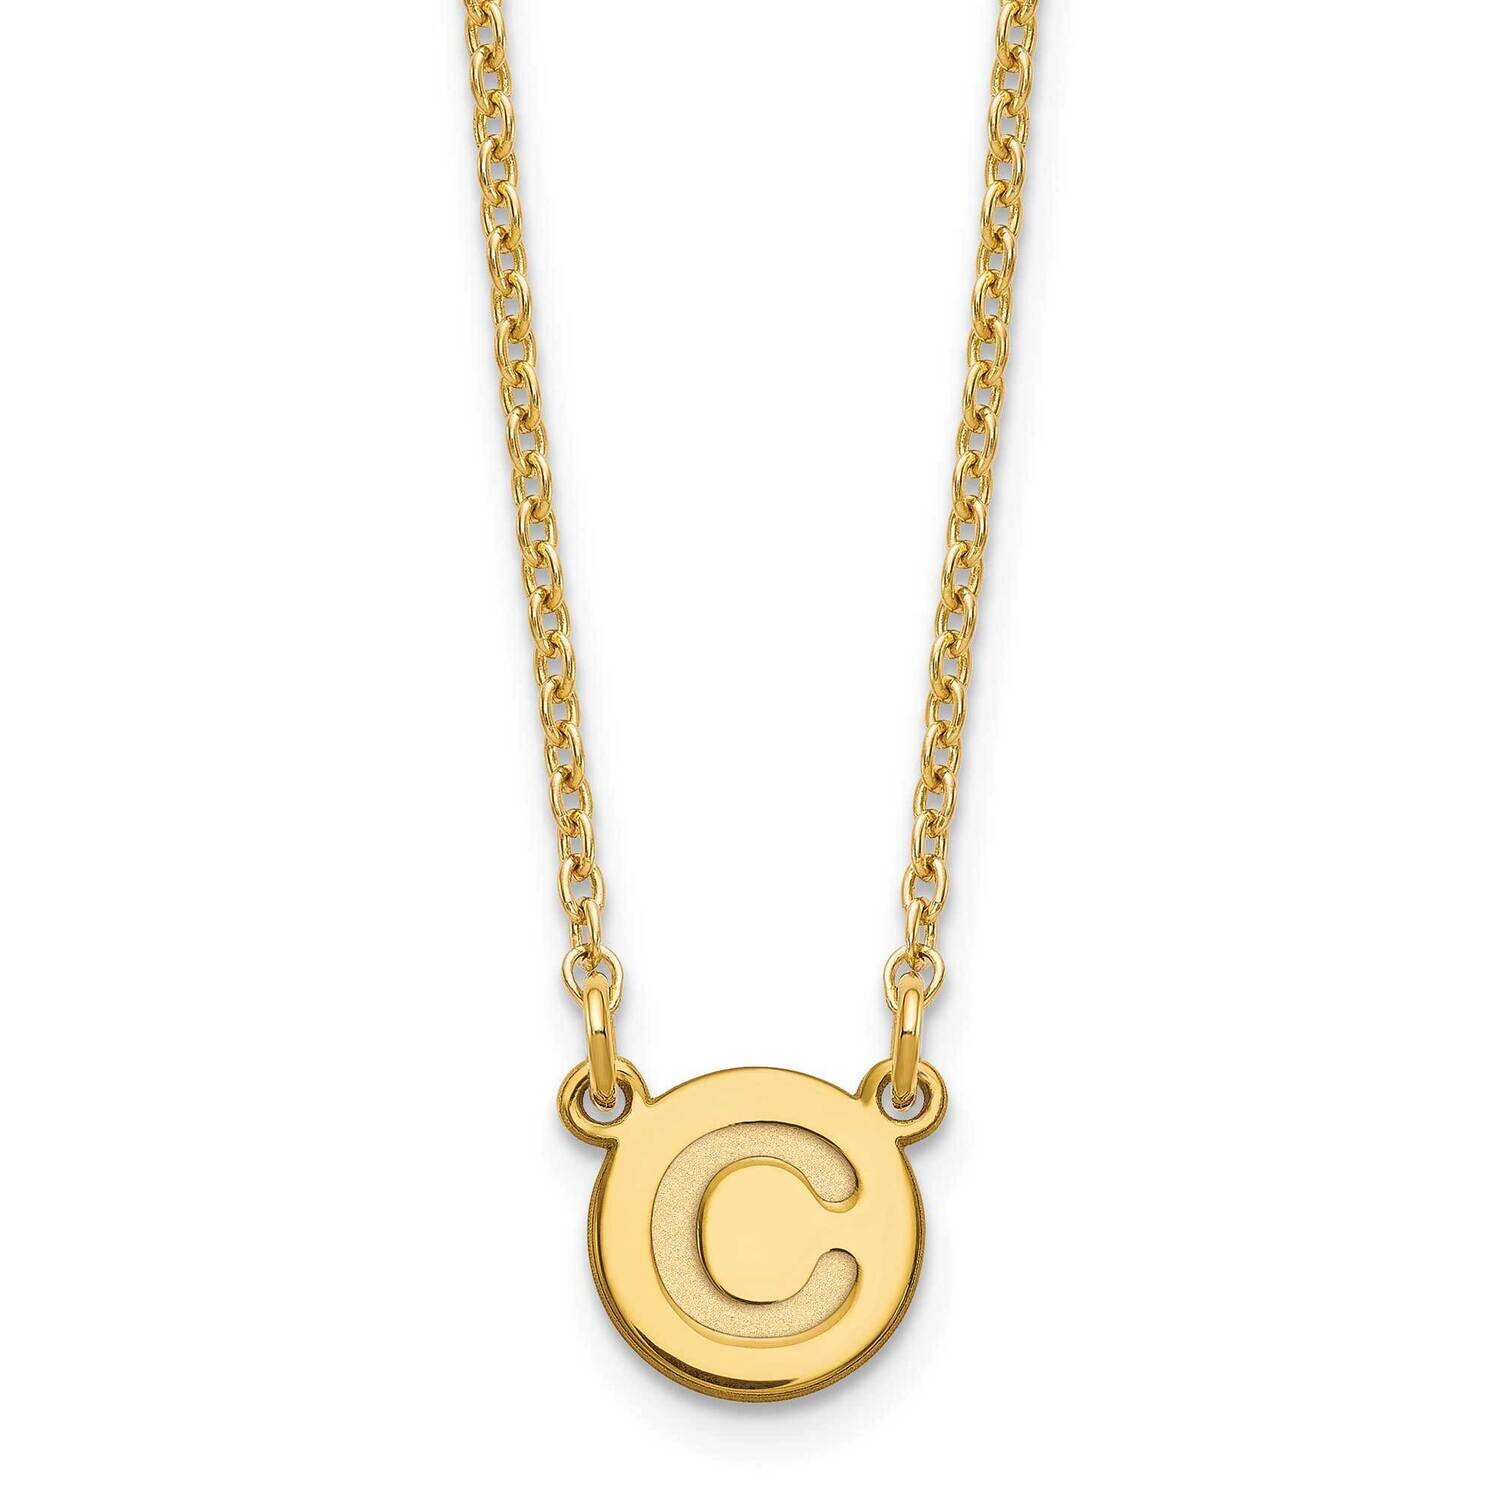 Gold-Plated Tiny Circle Block Letter C Initial Necklace Sterling Silver XNA722GP/C